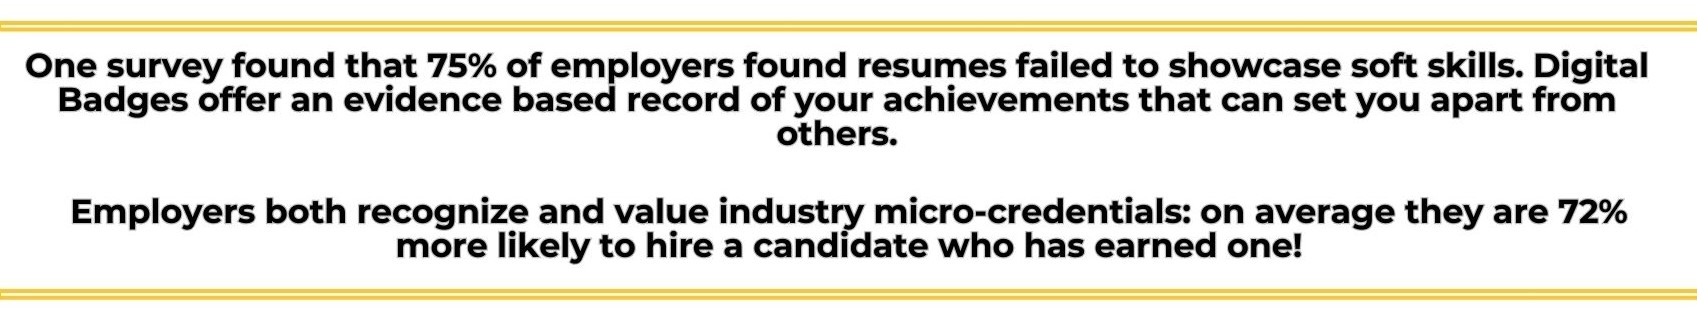 One survey found that 75% of employers found resumes failed to showcase soft skills. Digital Badges offer an evidence based record of your achievements that can set you apart from others.